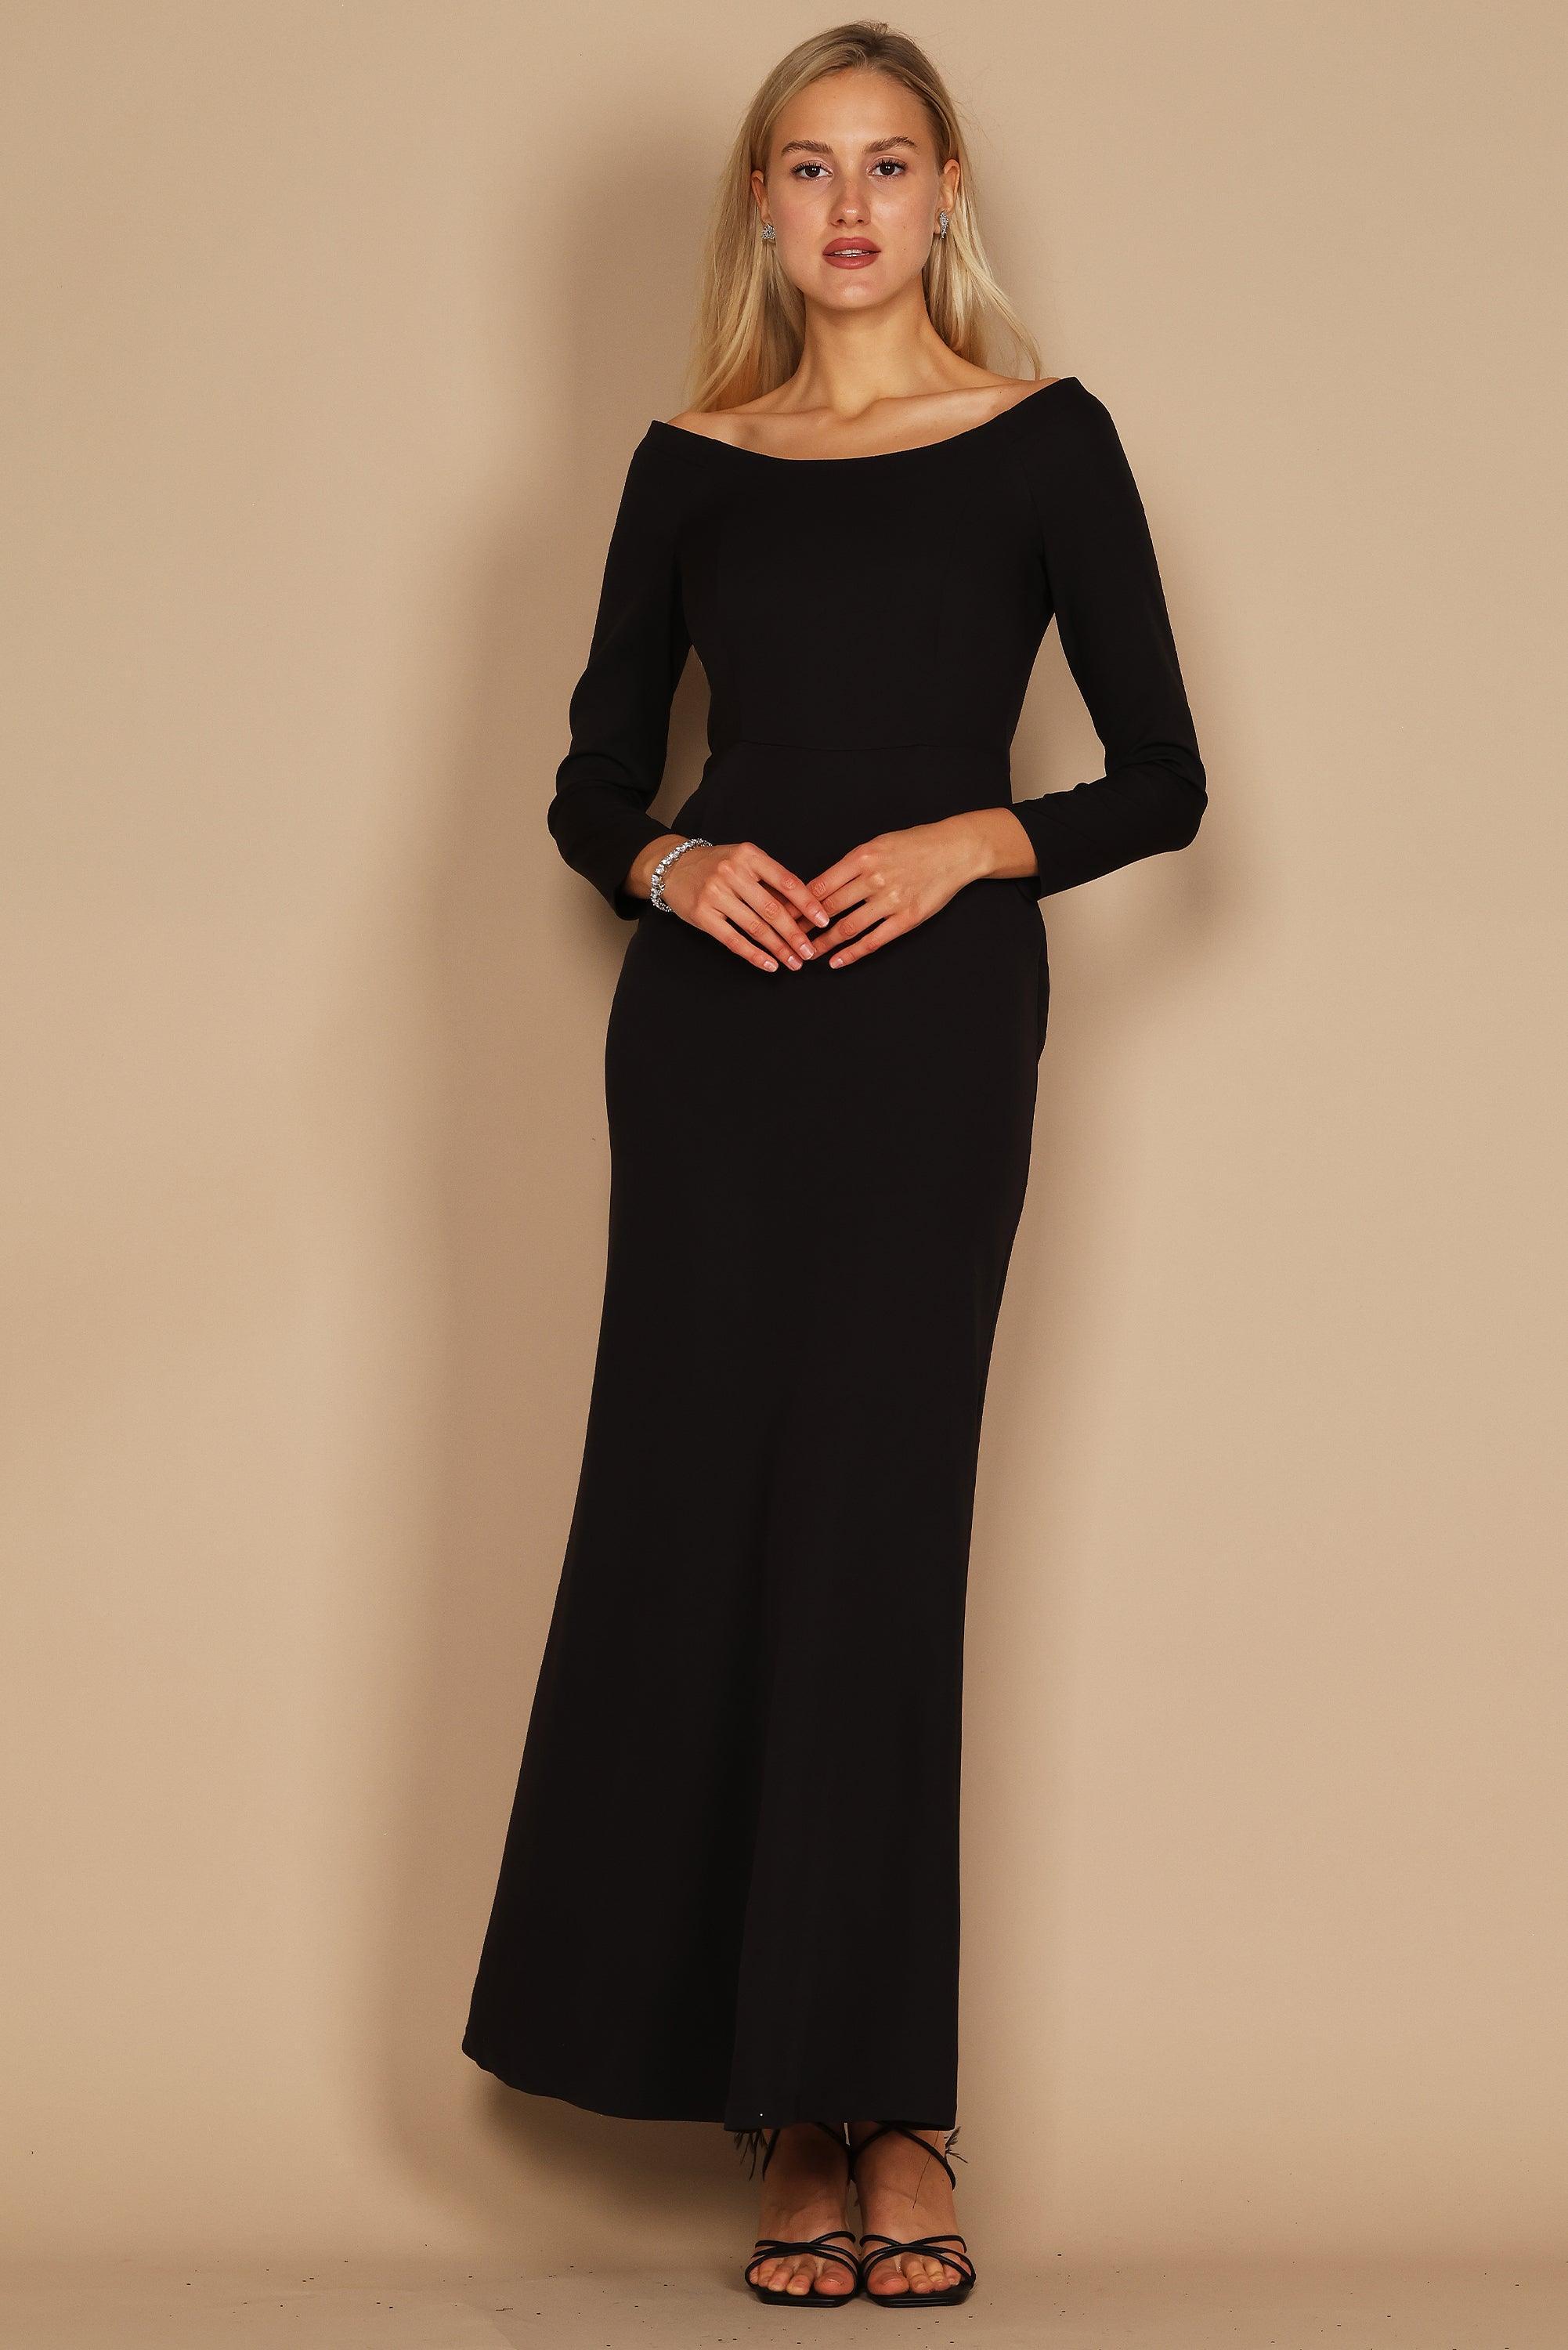 Laundry by Shelli Segal Long Fitted Formal Dress - The Dress Outlet